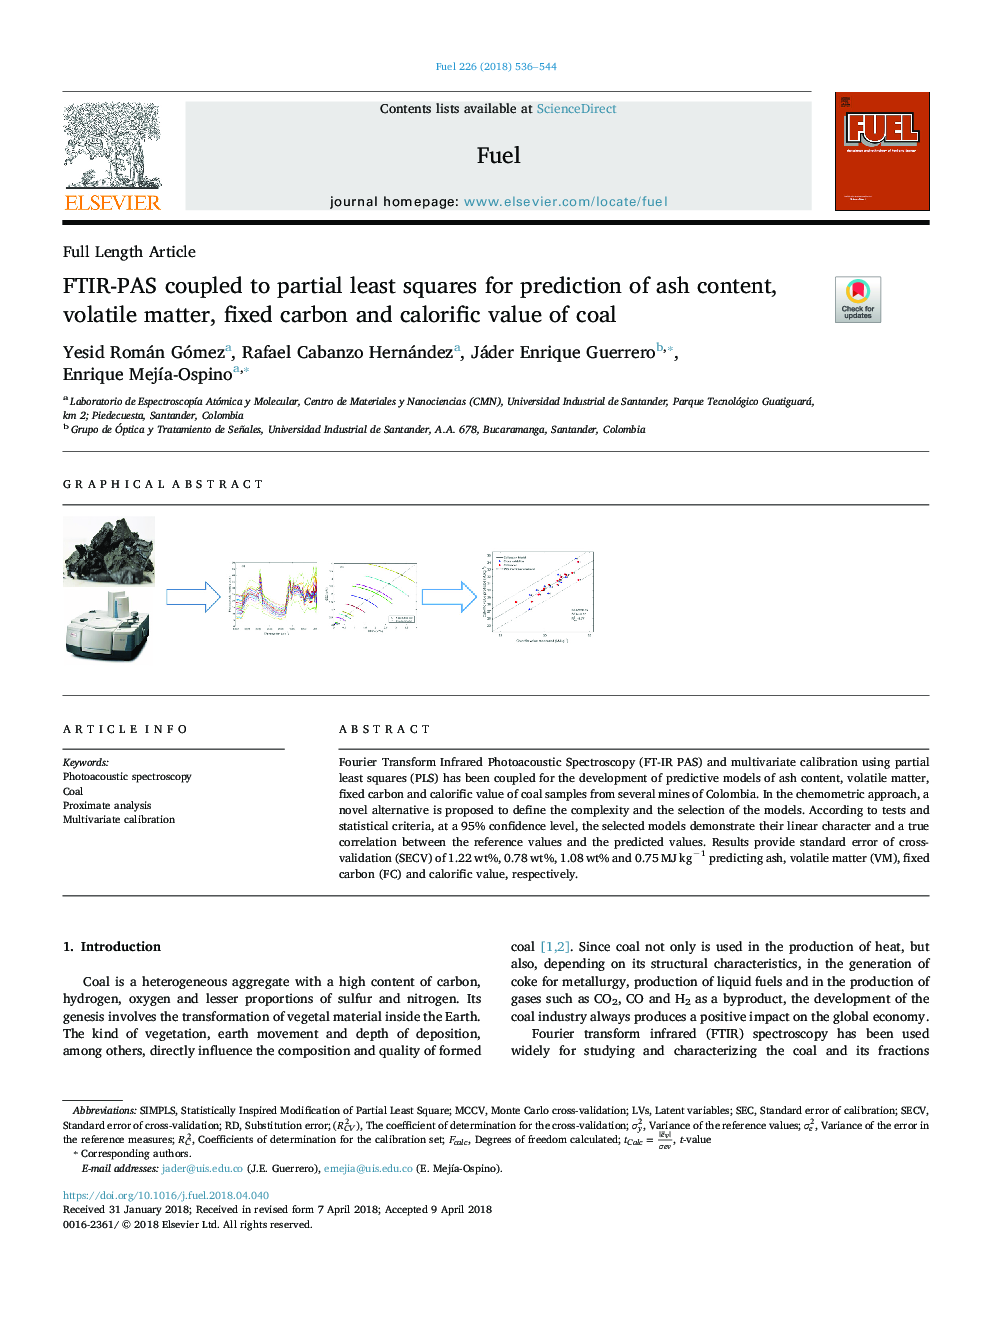 FTIR-PAS coupled to partial least squares for prediction of ash content, volatile matter, fixed carbon and calorific value of coal